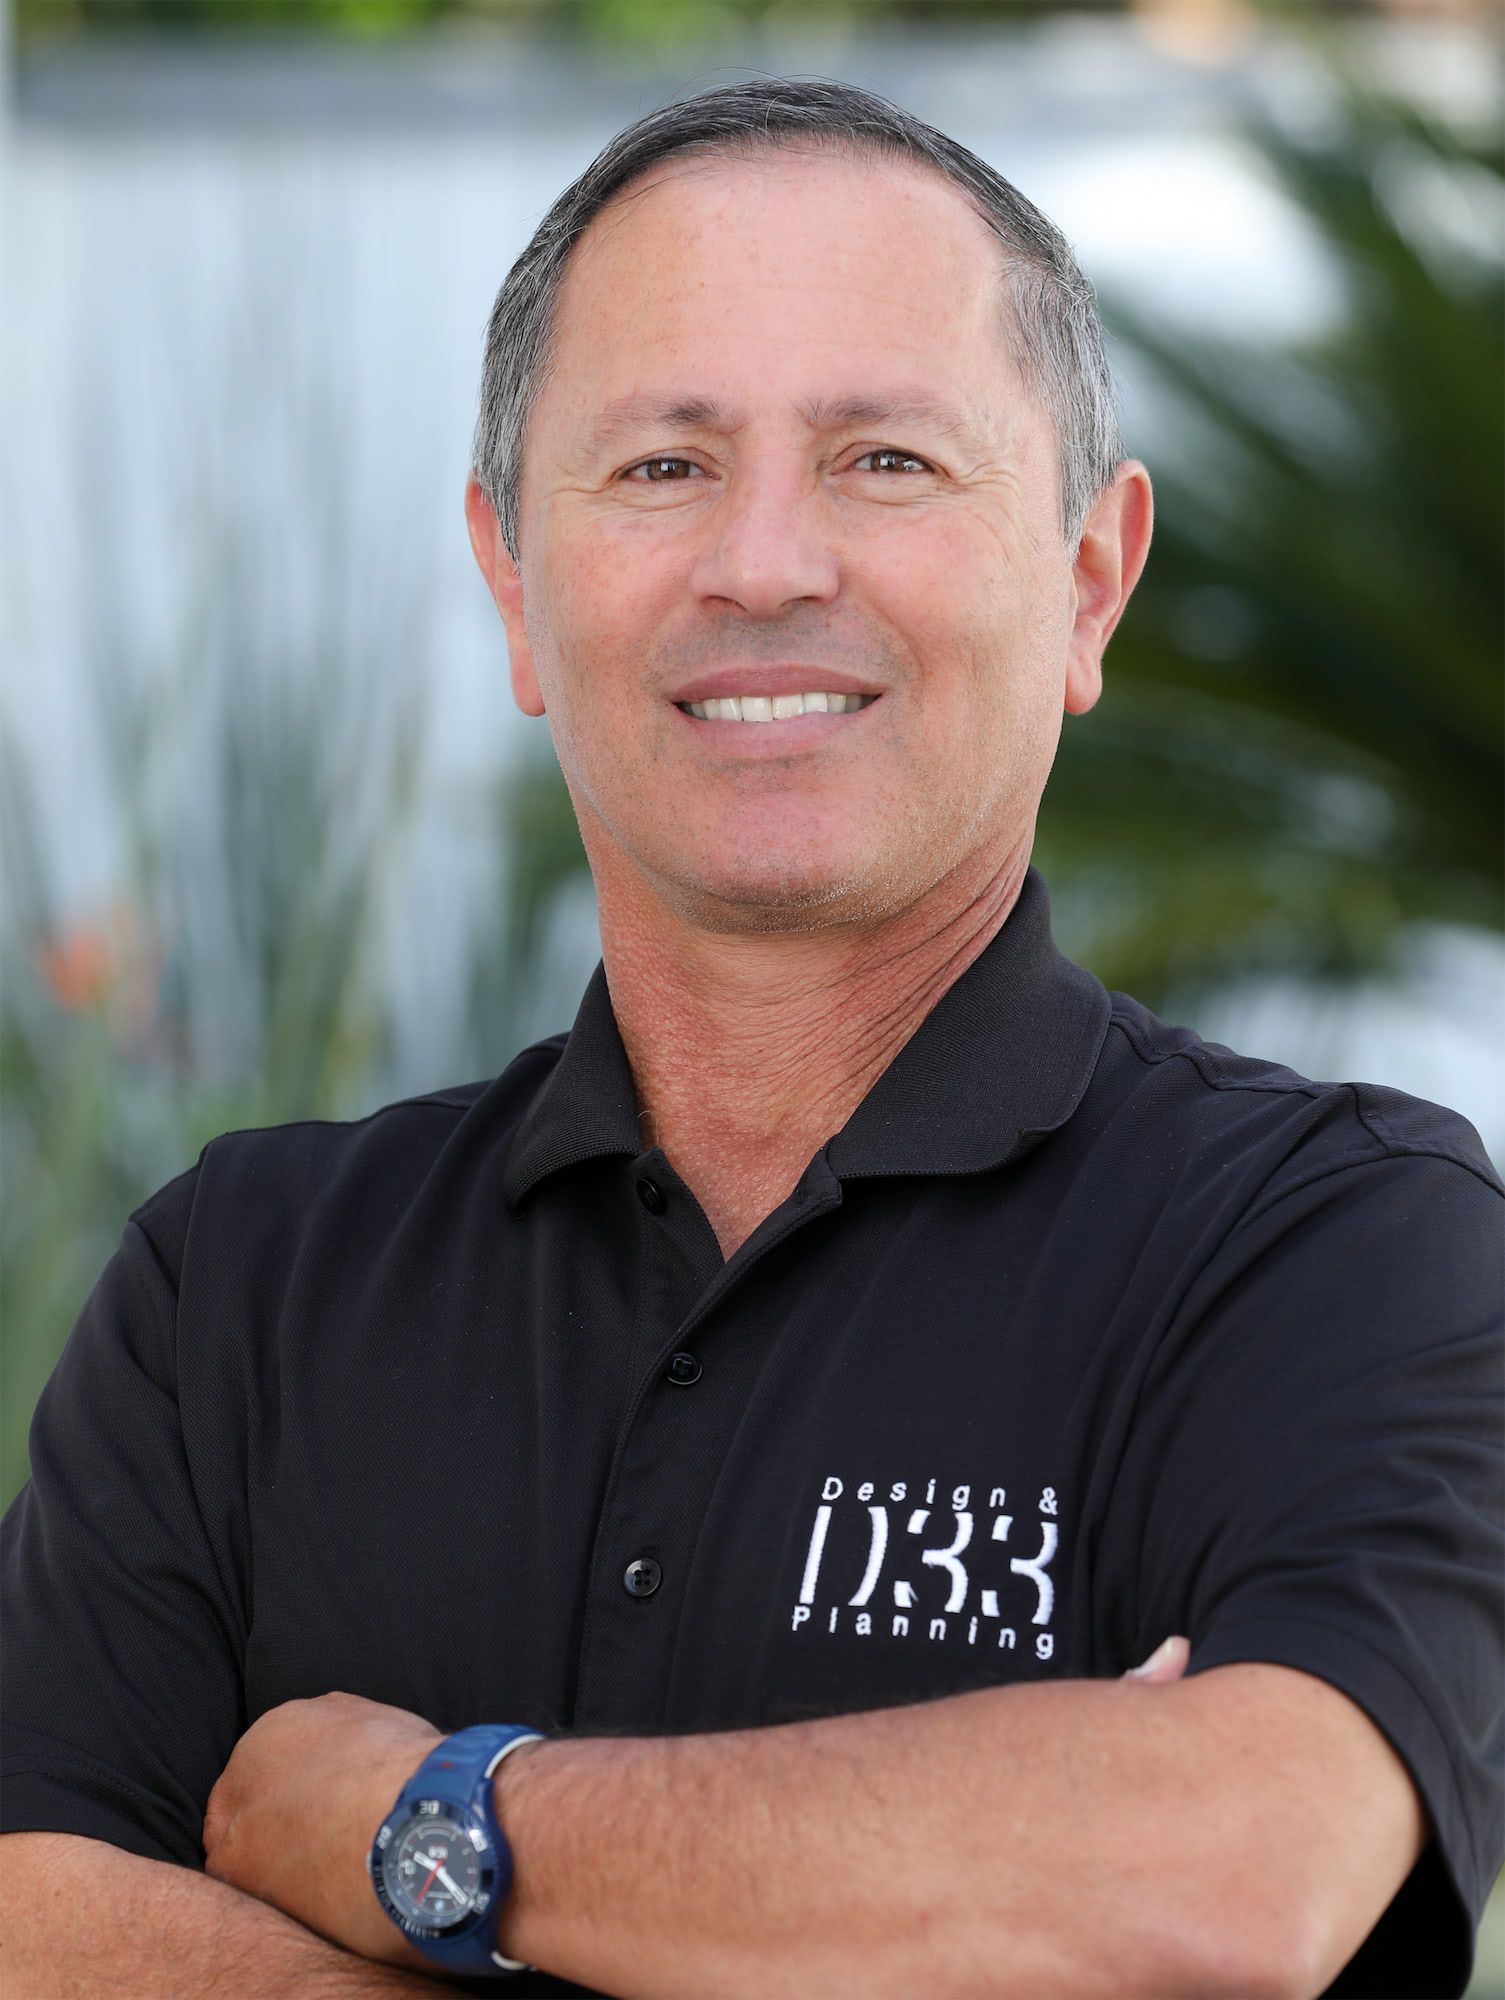 a man wearing a black shirt with the logo d33